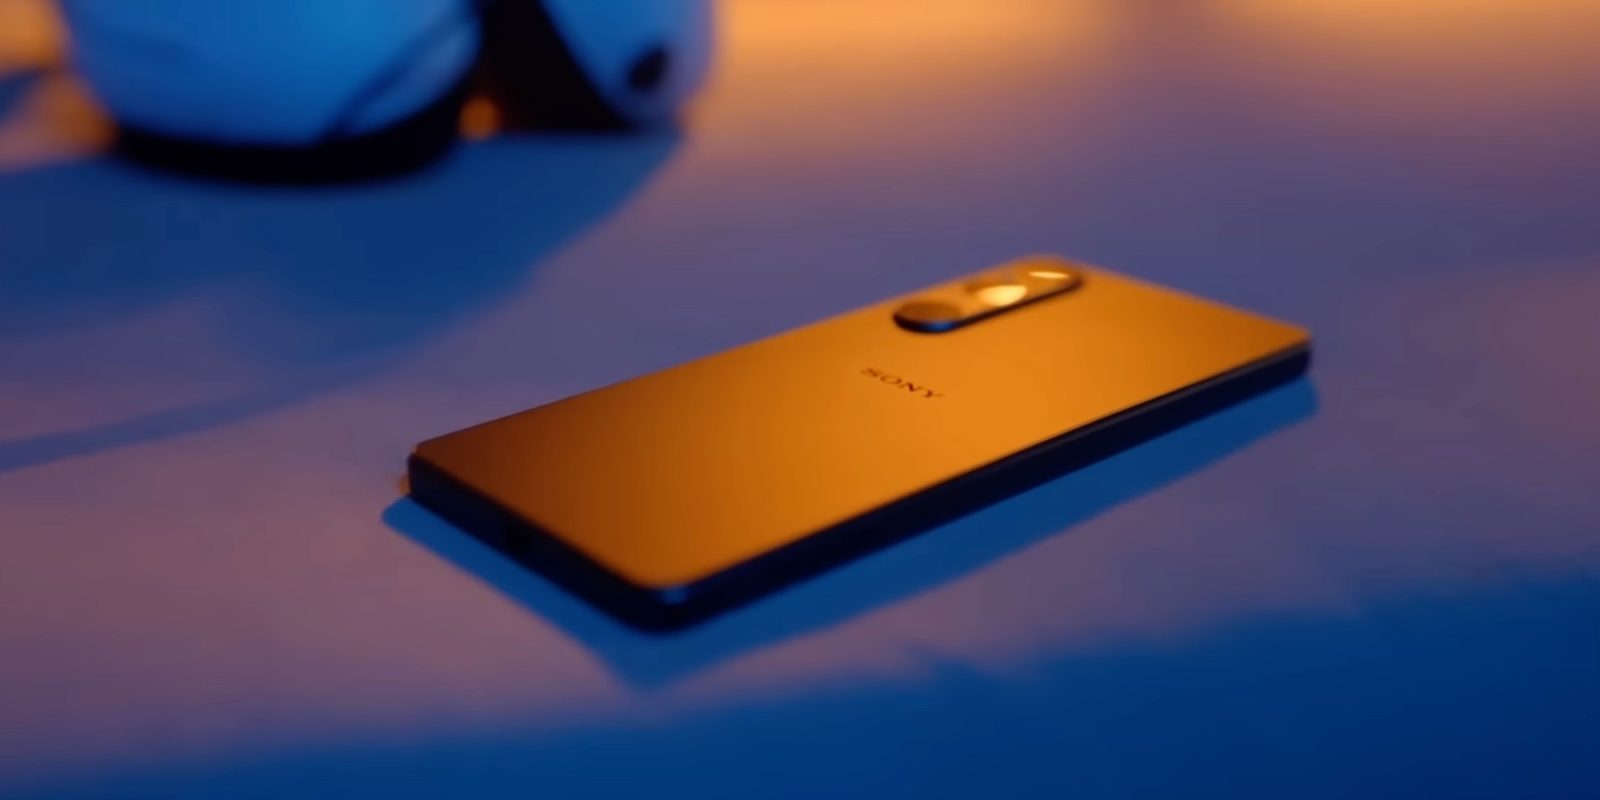 Sony could launch the Xperia 1 VI at May 17 event